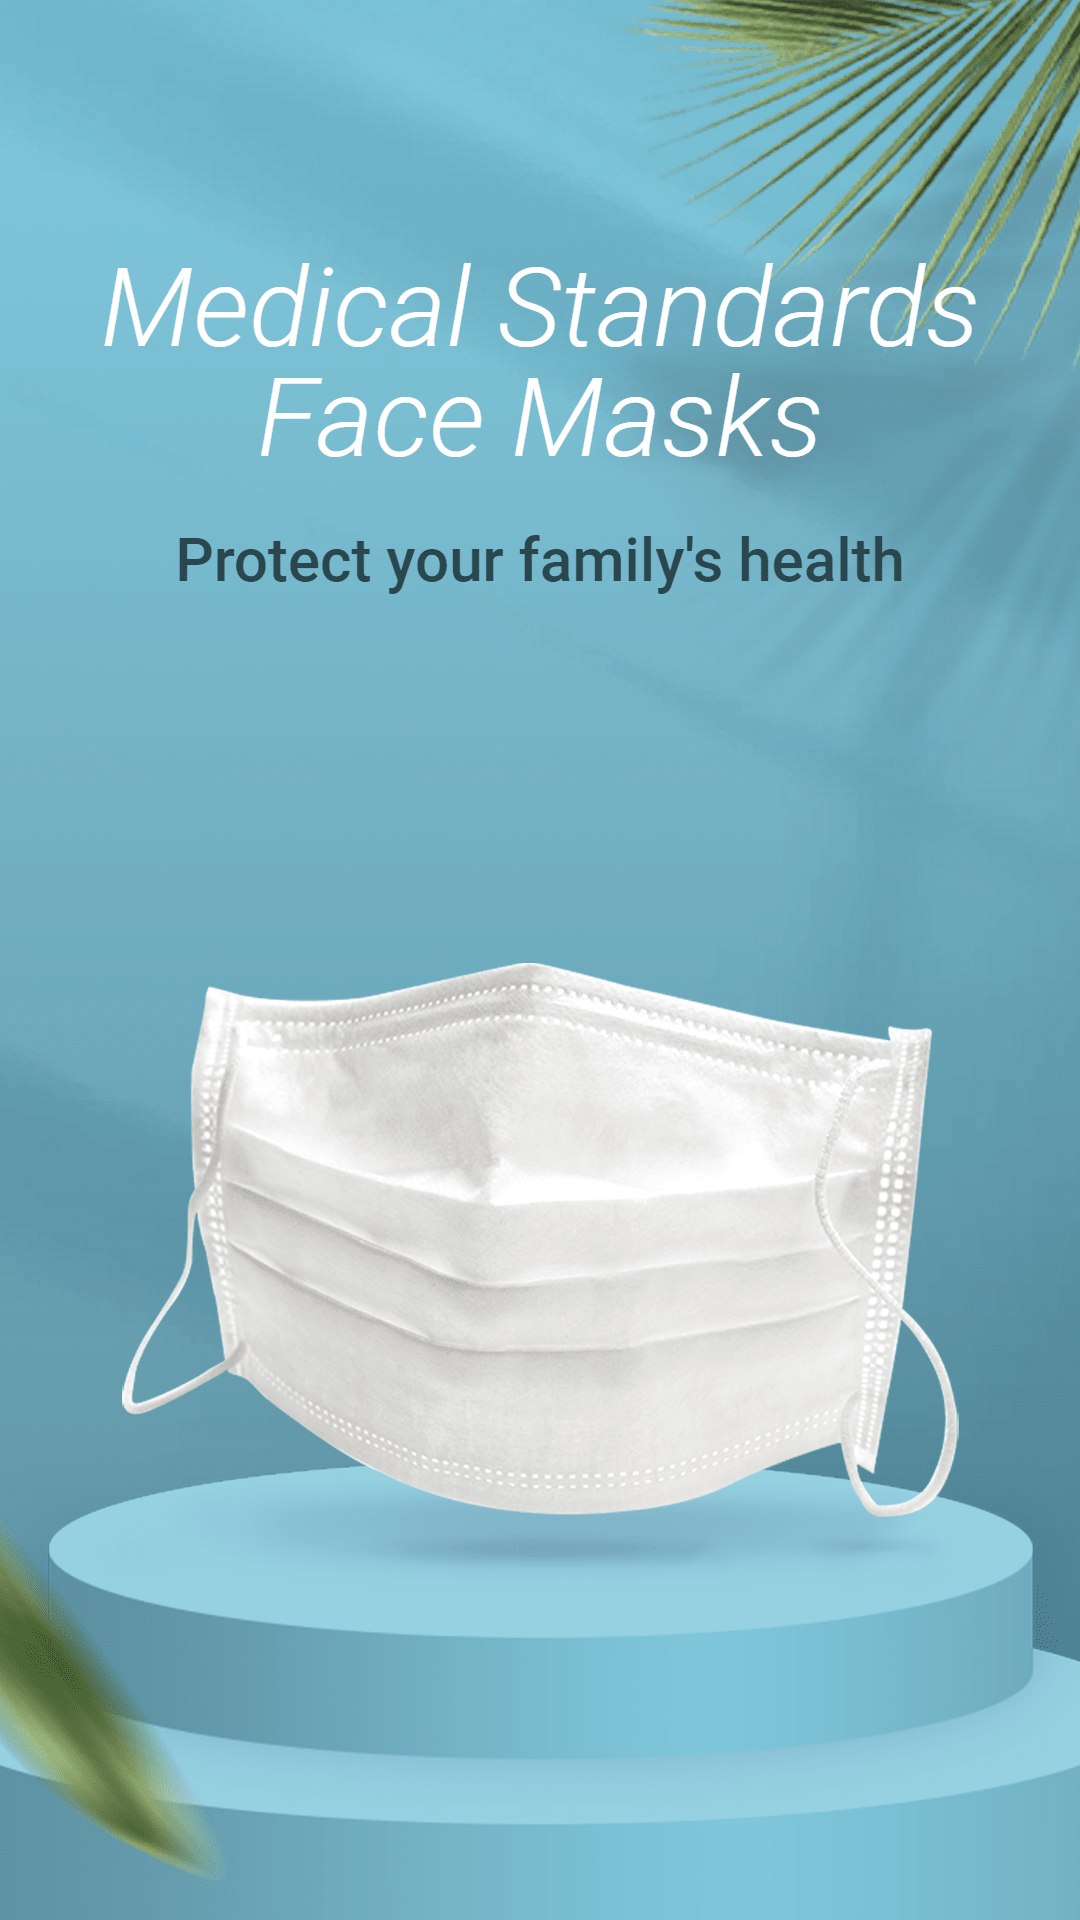 Simple Face Masks Display Ecommerce Story预览效果